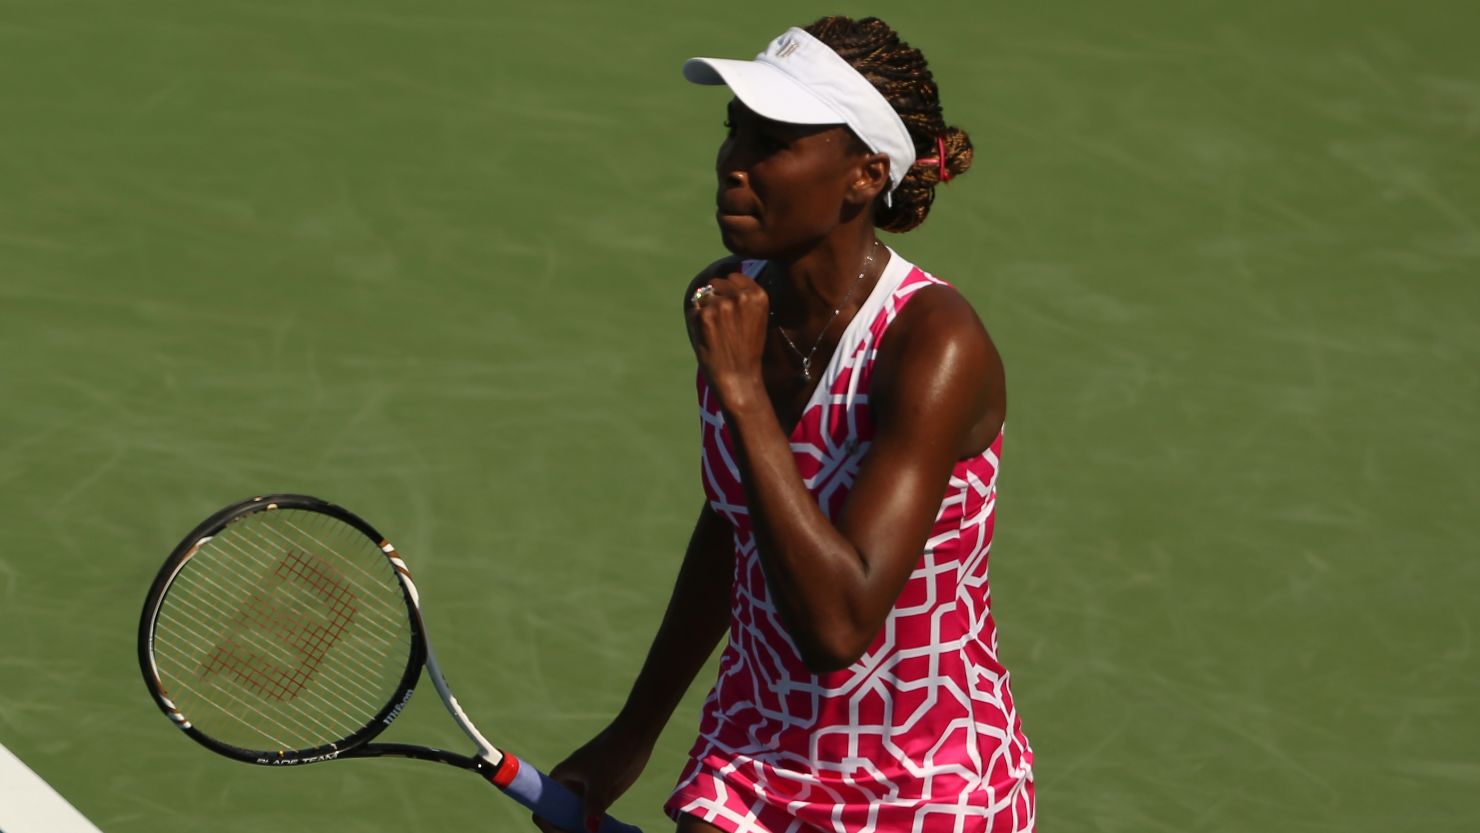 Seven-time grand slam winner Venus Williams is currently 64th in the women's world tennis rankings.